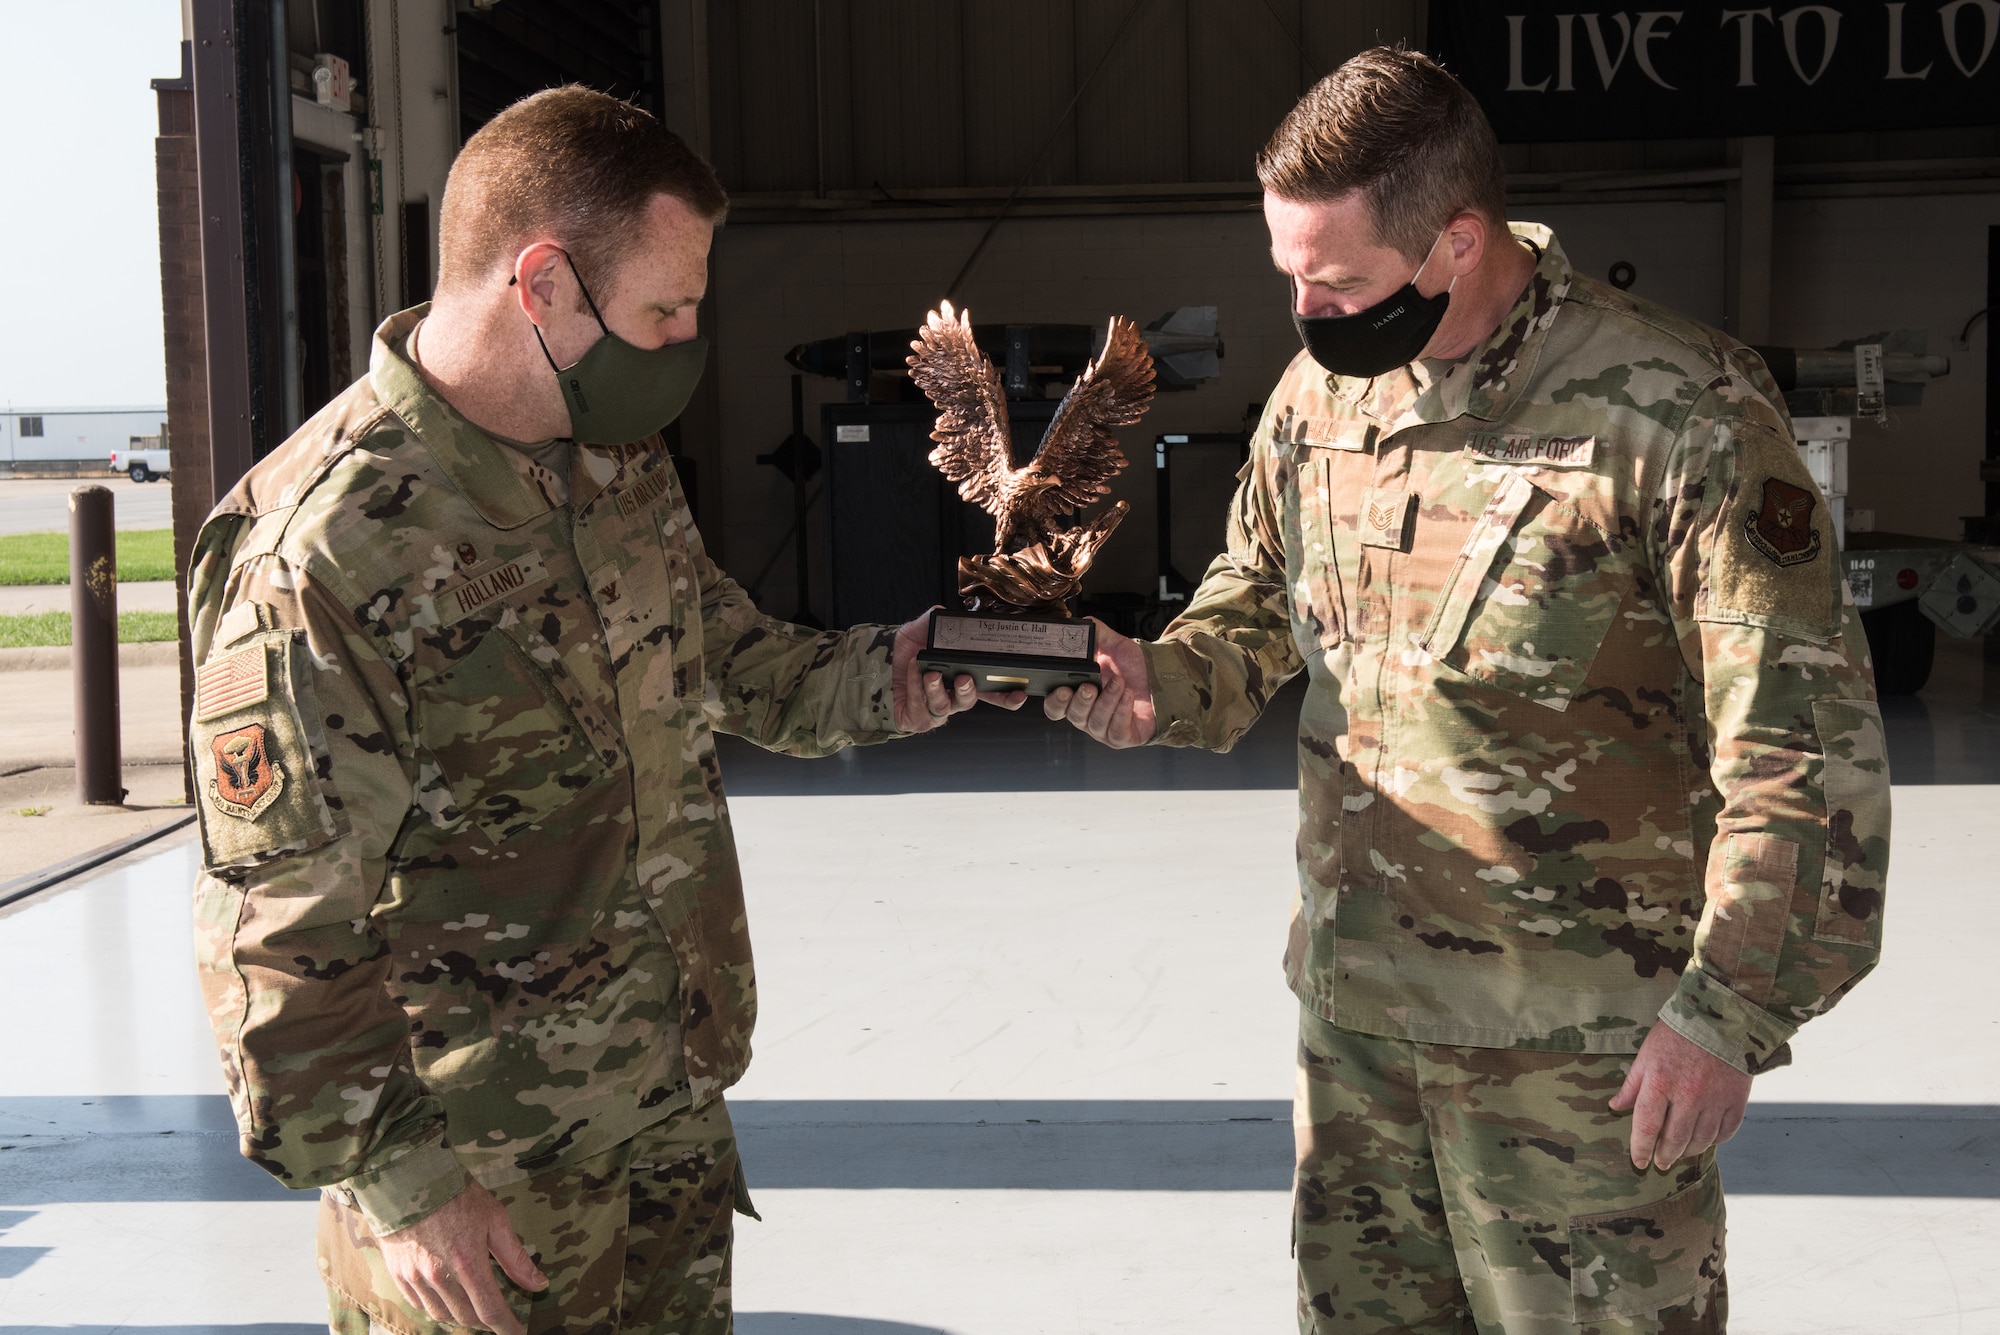 U.S. Air Force Jeffrey Col. Holland, 509th Maintenance Group commander, left, presents the Lt. Gen. Leo Marquez Award to Tech. Sgt. Justin Hall, 509th MXG loading standardization crew member, right, at Whiteman Air Force Base, Missouri, Aug. 14, 2020. Hall won the award of Technician Supervisor Category NCO Munitions/Missile Maintenance. This award recognizes military and civil service aircraft, munitions, and missile maintenance personnel who perform hands-on maintenance or manage a maintenance function. (U.S. Air Force photo by Airman 1st Class Christina Carter)